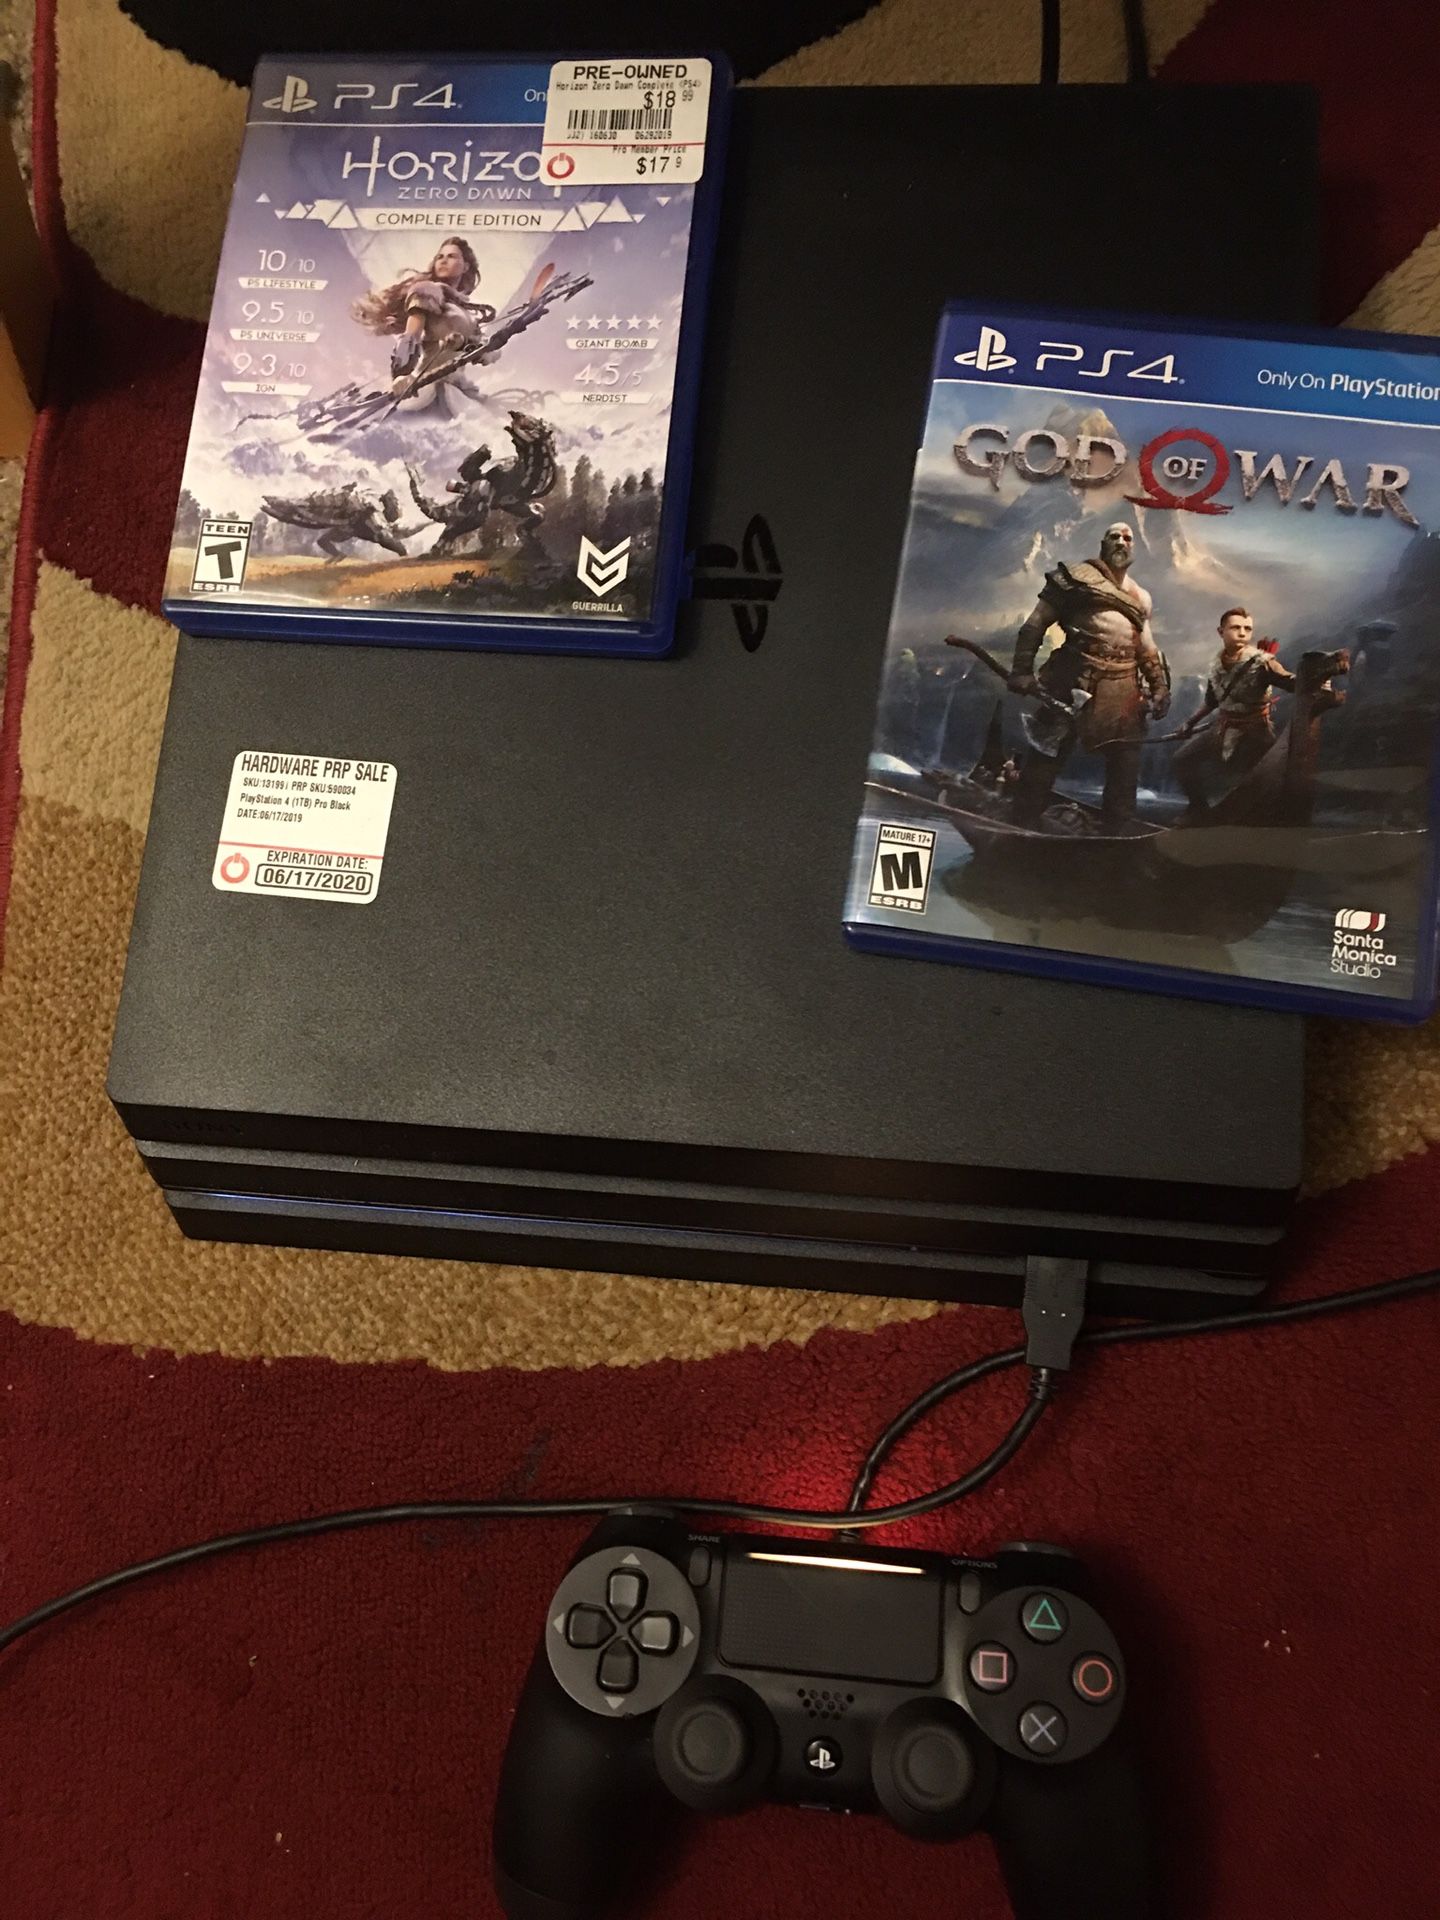 PS4 Pro comes with Horizon zero dawn/ God of war/1 controller Console 4 months old